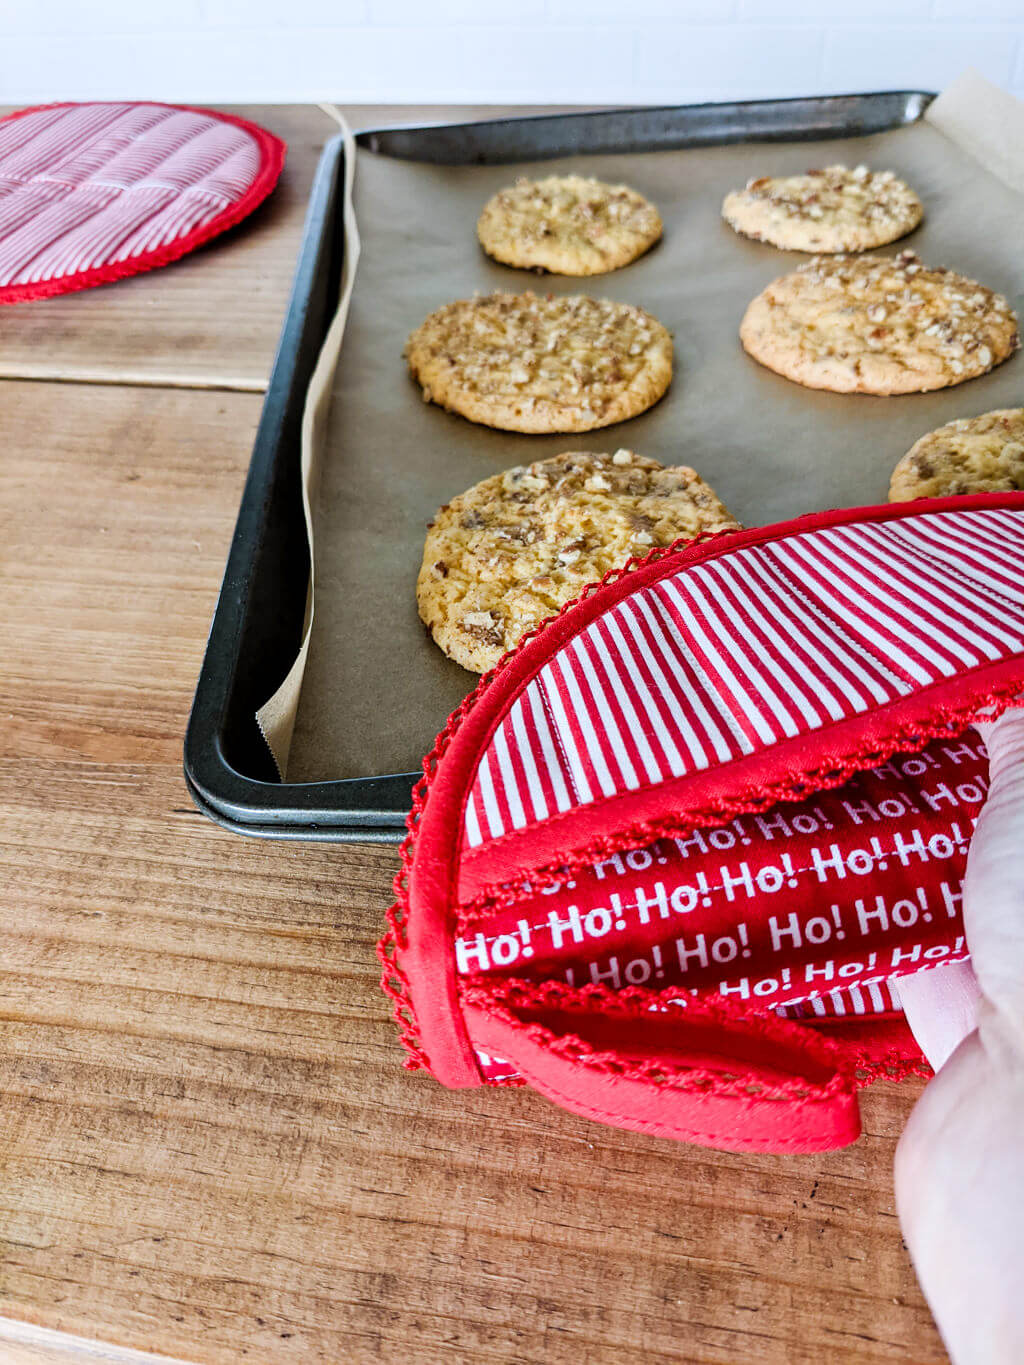 DIY Christmas potholder pattern with cookies